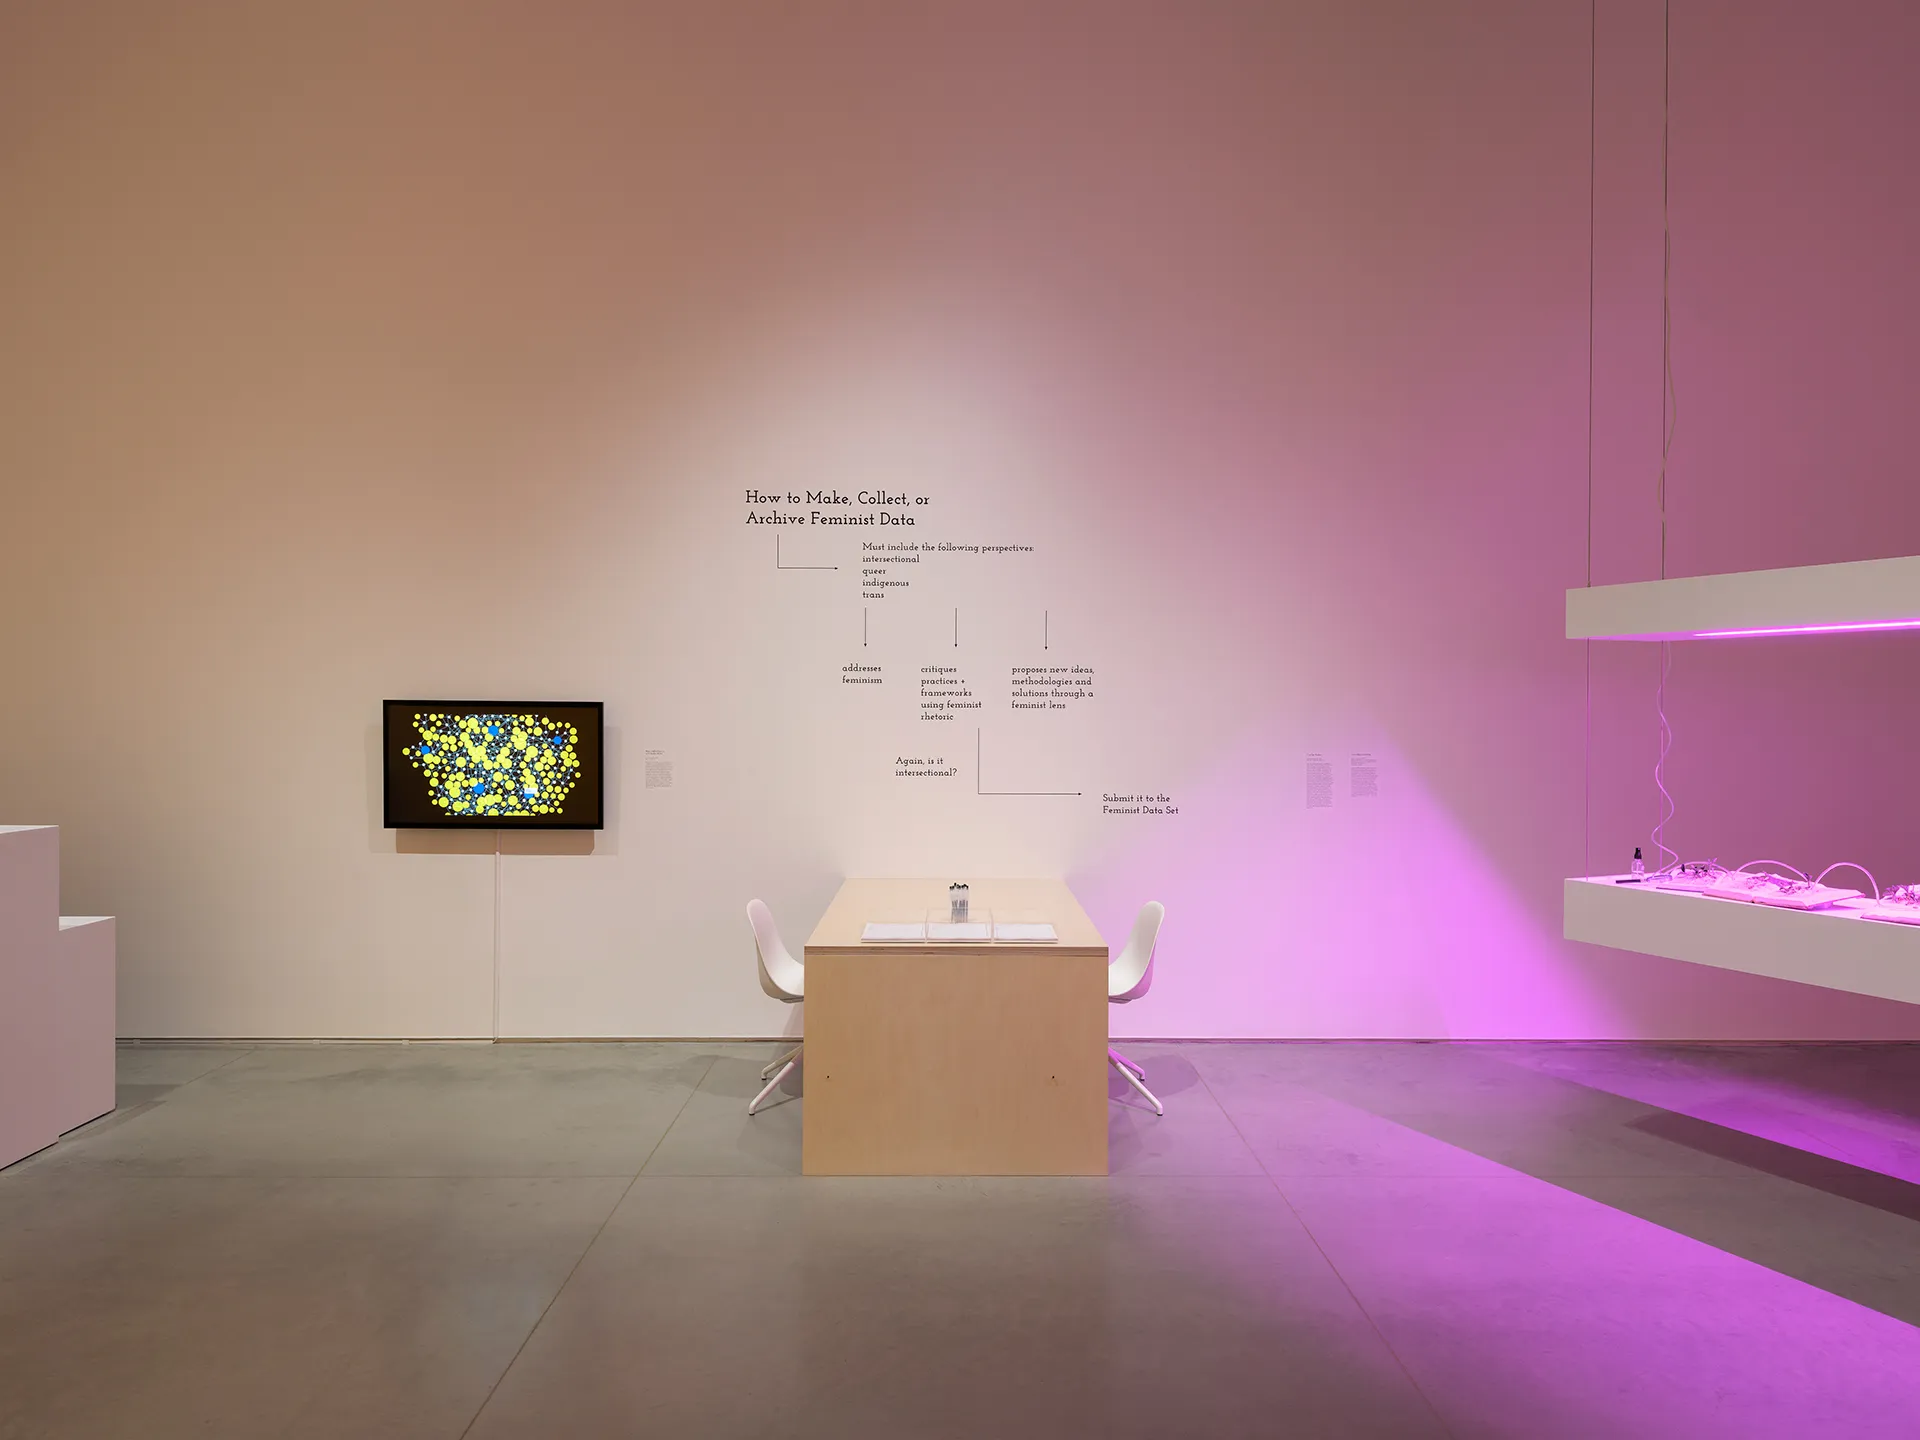 Interior space featuring a white wall and a gray floor. There is a wooden table with two swivel chairs at the center of the frame and a diagram on the wall behind it is labeled “How to Make, Collect, or Archive Feminist Data.” A monitor hangs on the wall to the left of the table and wall diagram. Some furniture elements are visible to the far left and right.